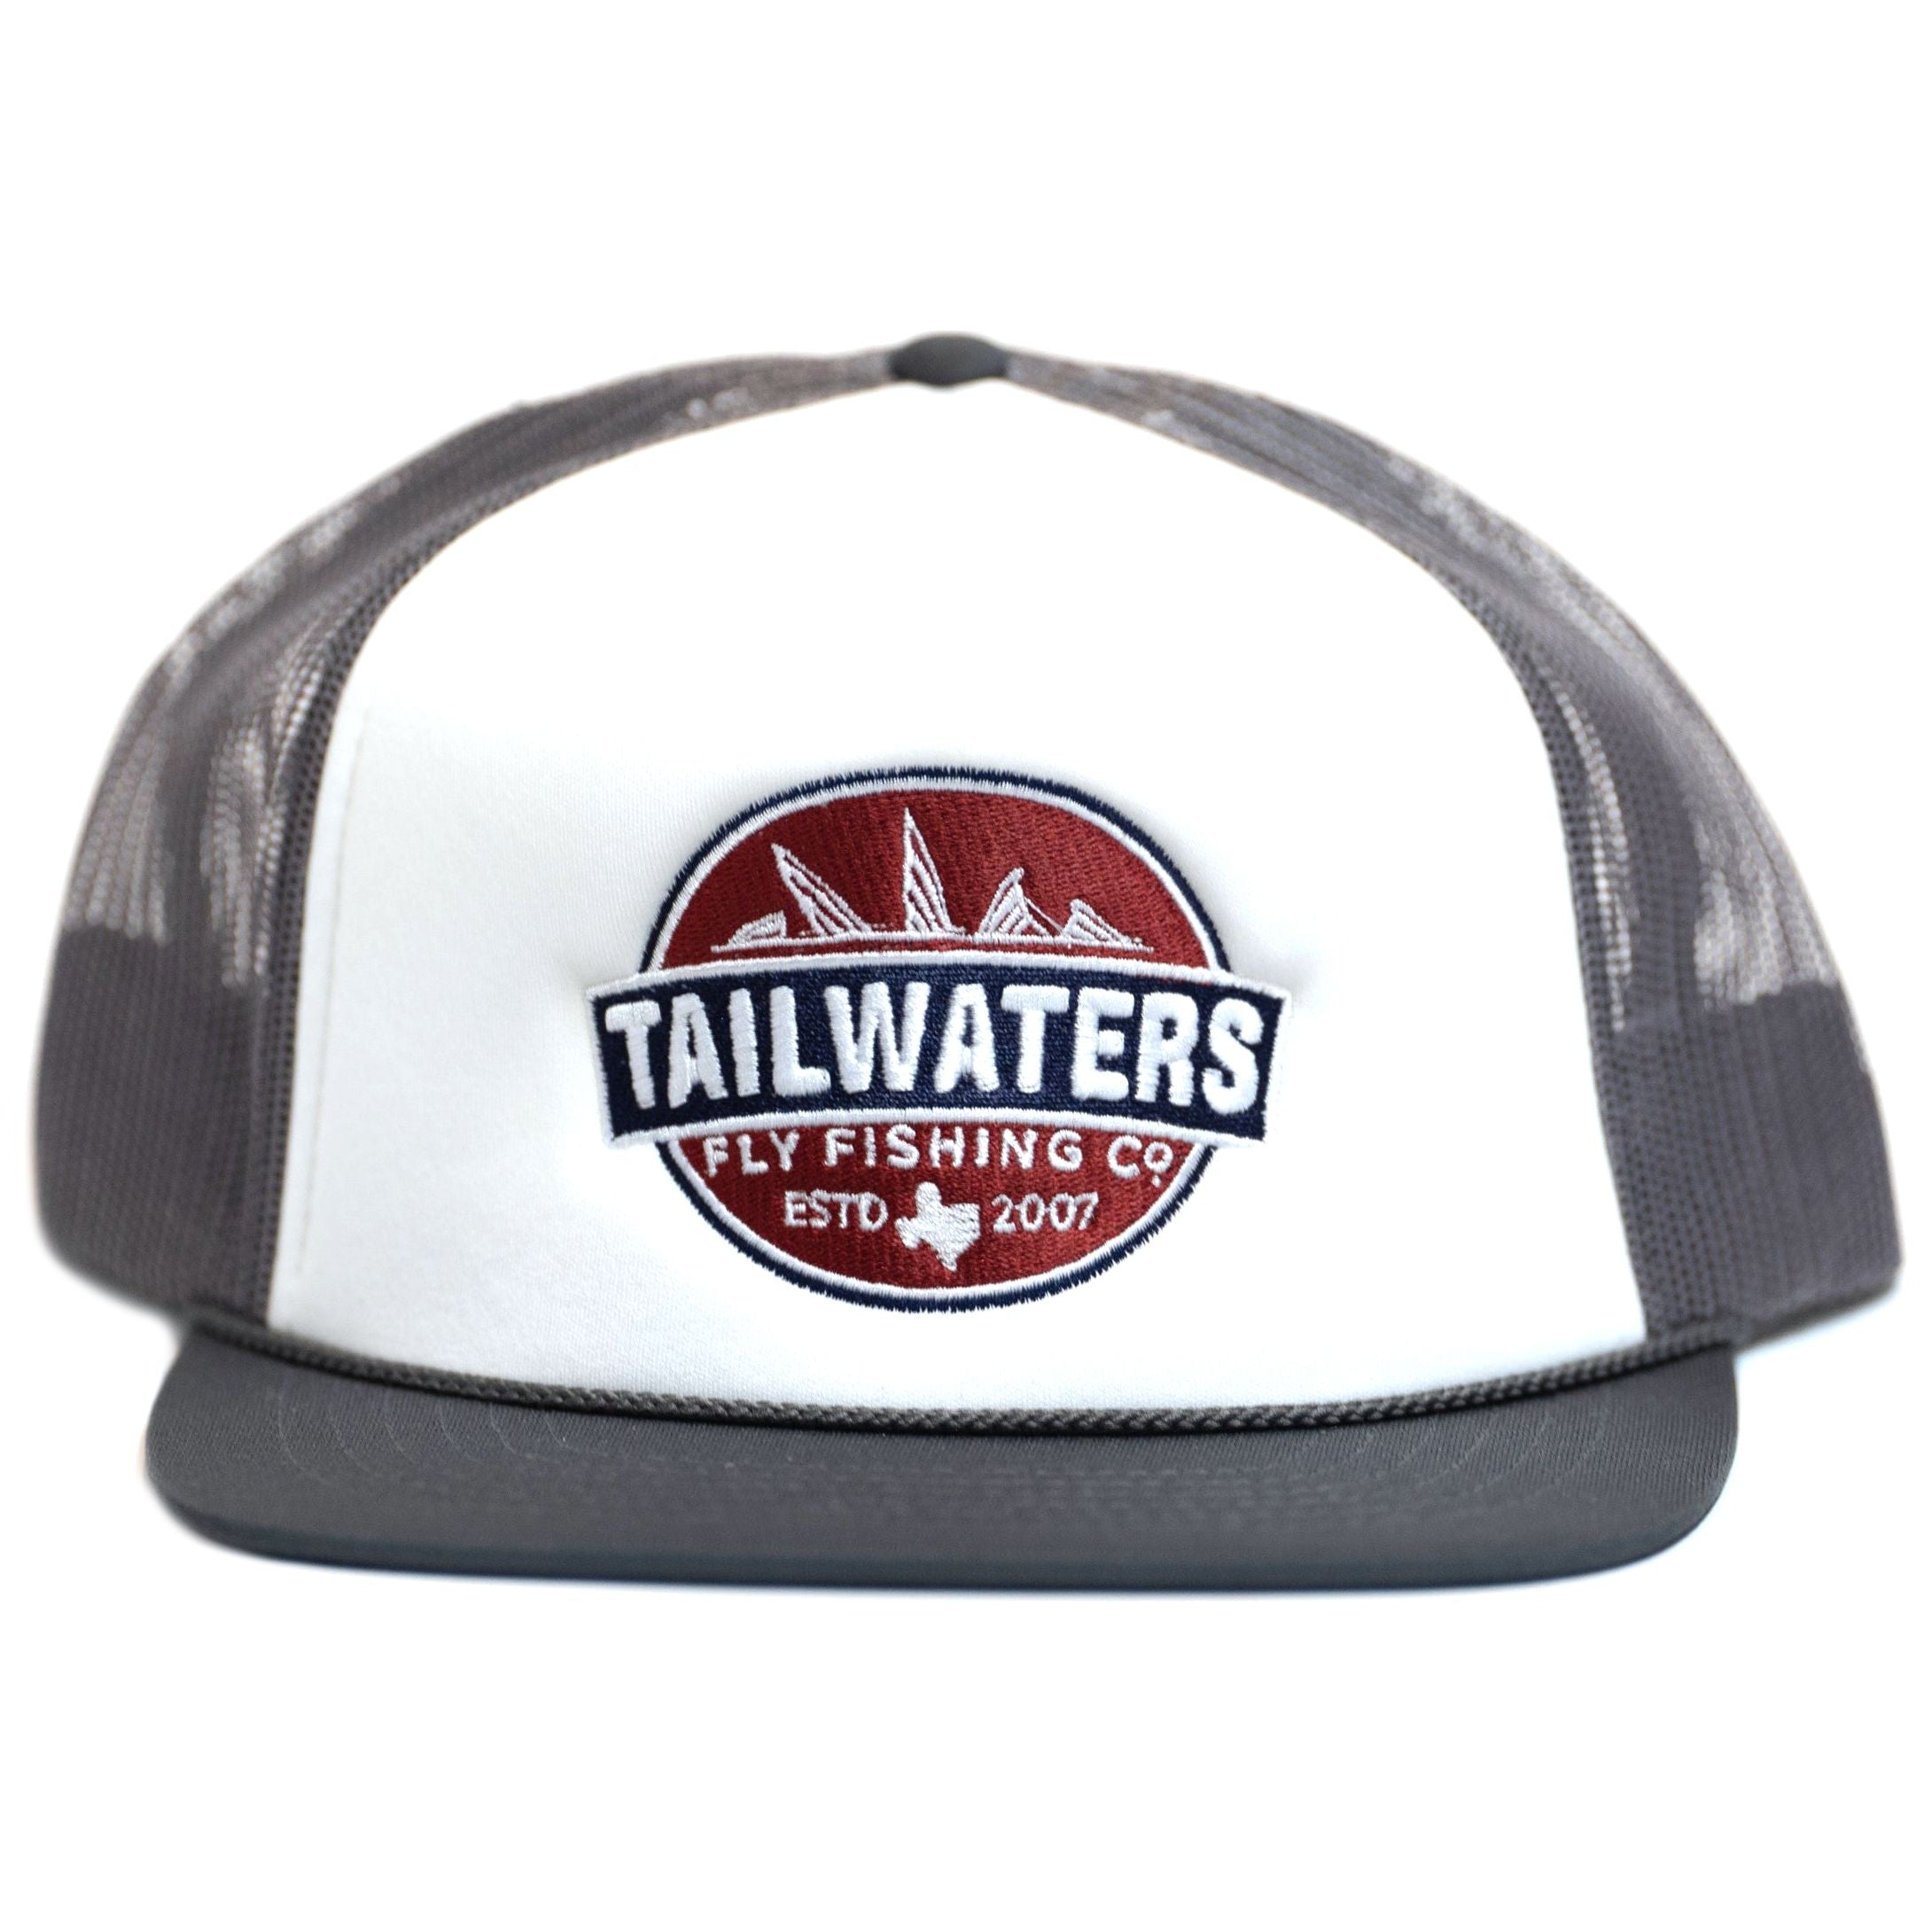 Tailwaters Fly Fishing Classic Logo Foam Trucker Hat White / Charcoal Image 01